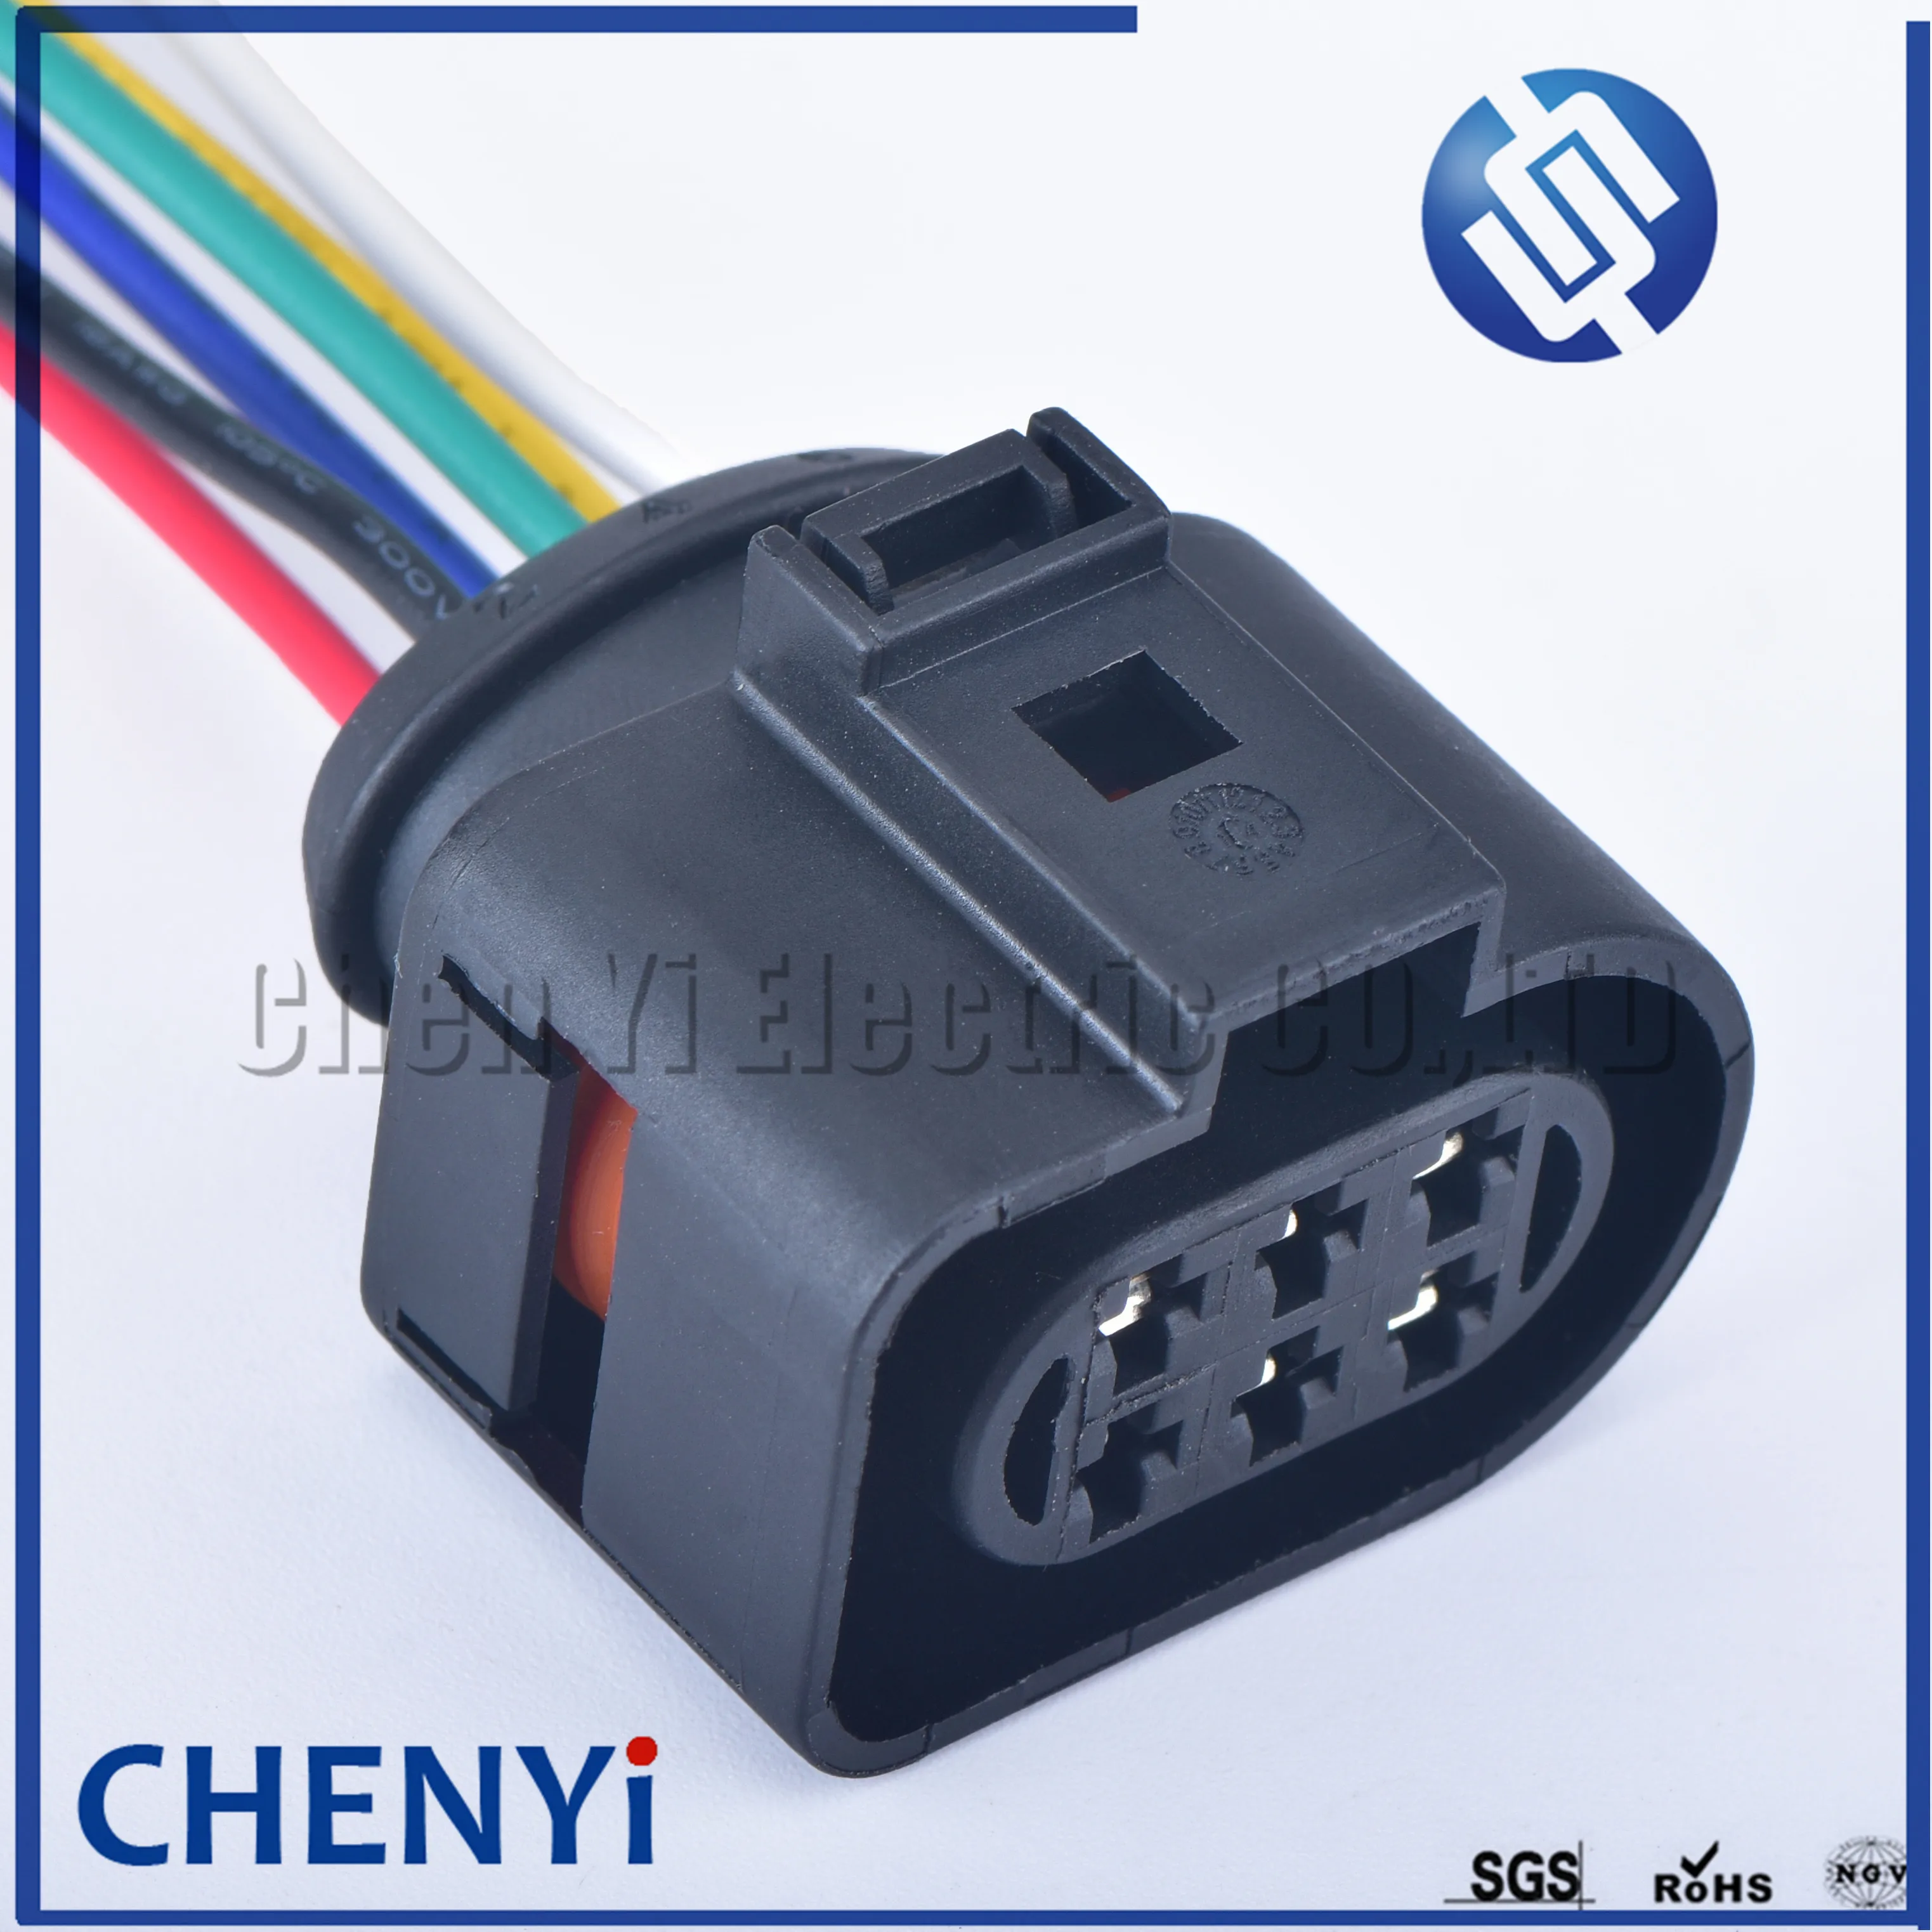 

6 Pin 3.5mm 1J0973733 Automotive waterproof connector plug LSU 4.2 Oxygen Sensor Connector 1J0 973 733 with wires 1J0973833